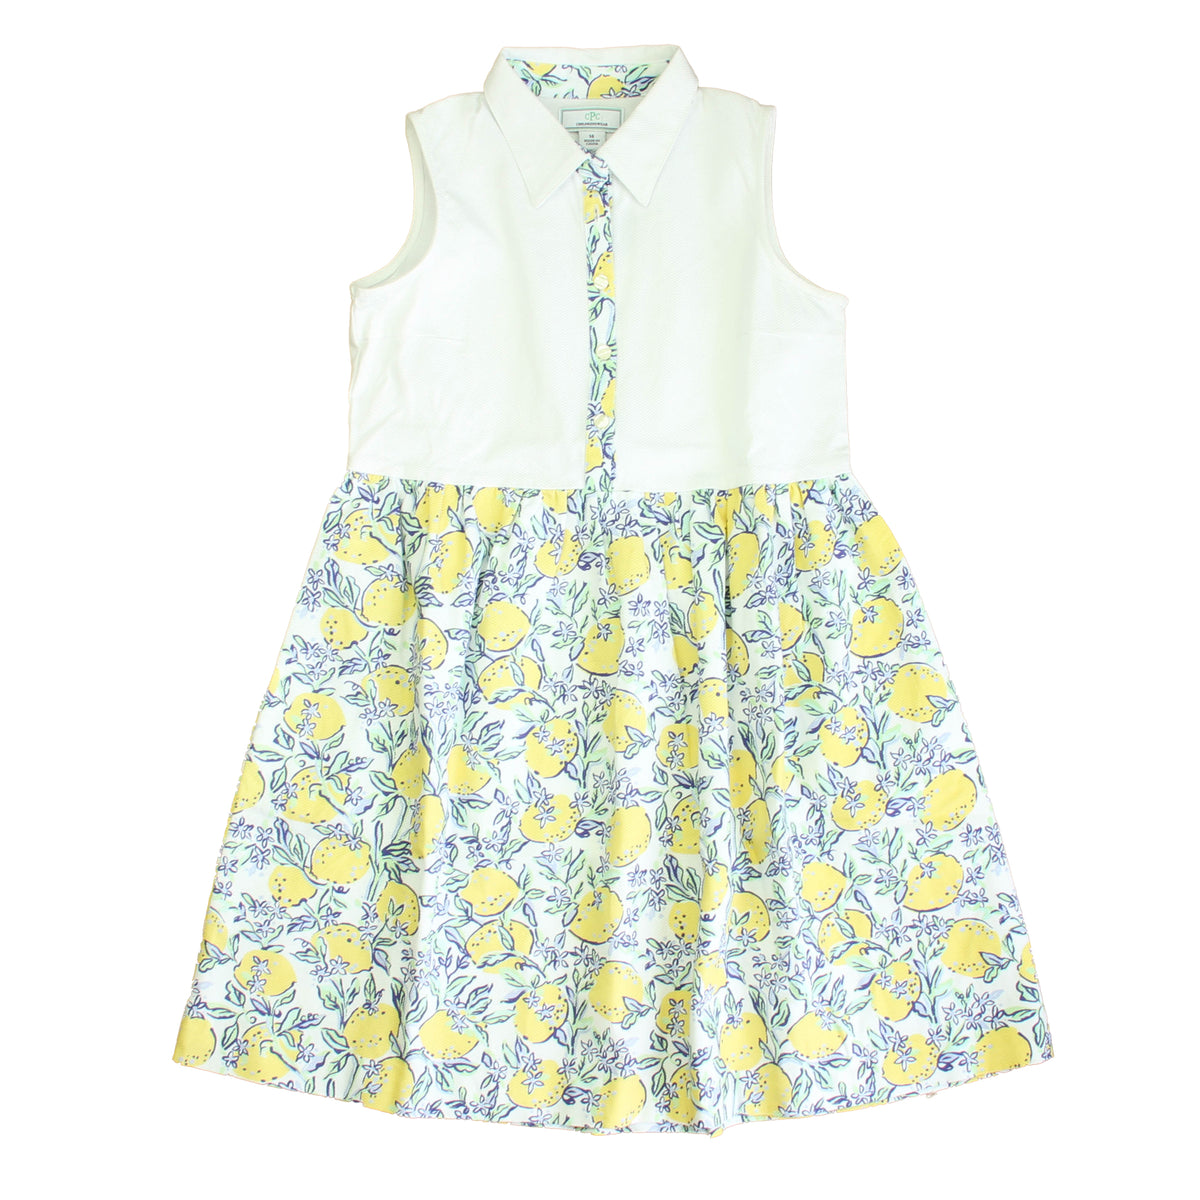 New with Tags: White | Lemonade Stand Dress size: 6-14 Years -- FINAL SALE